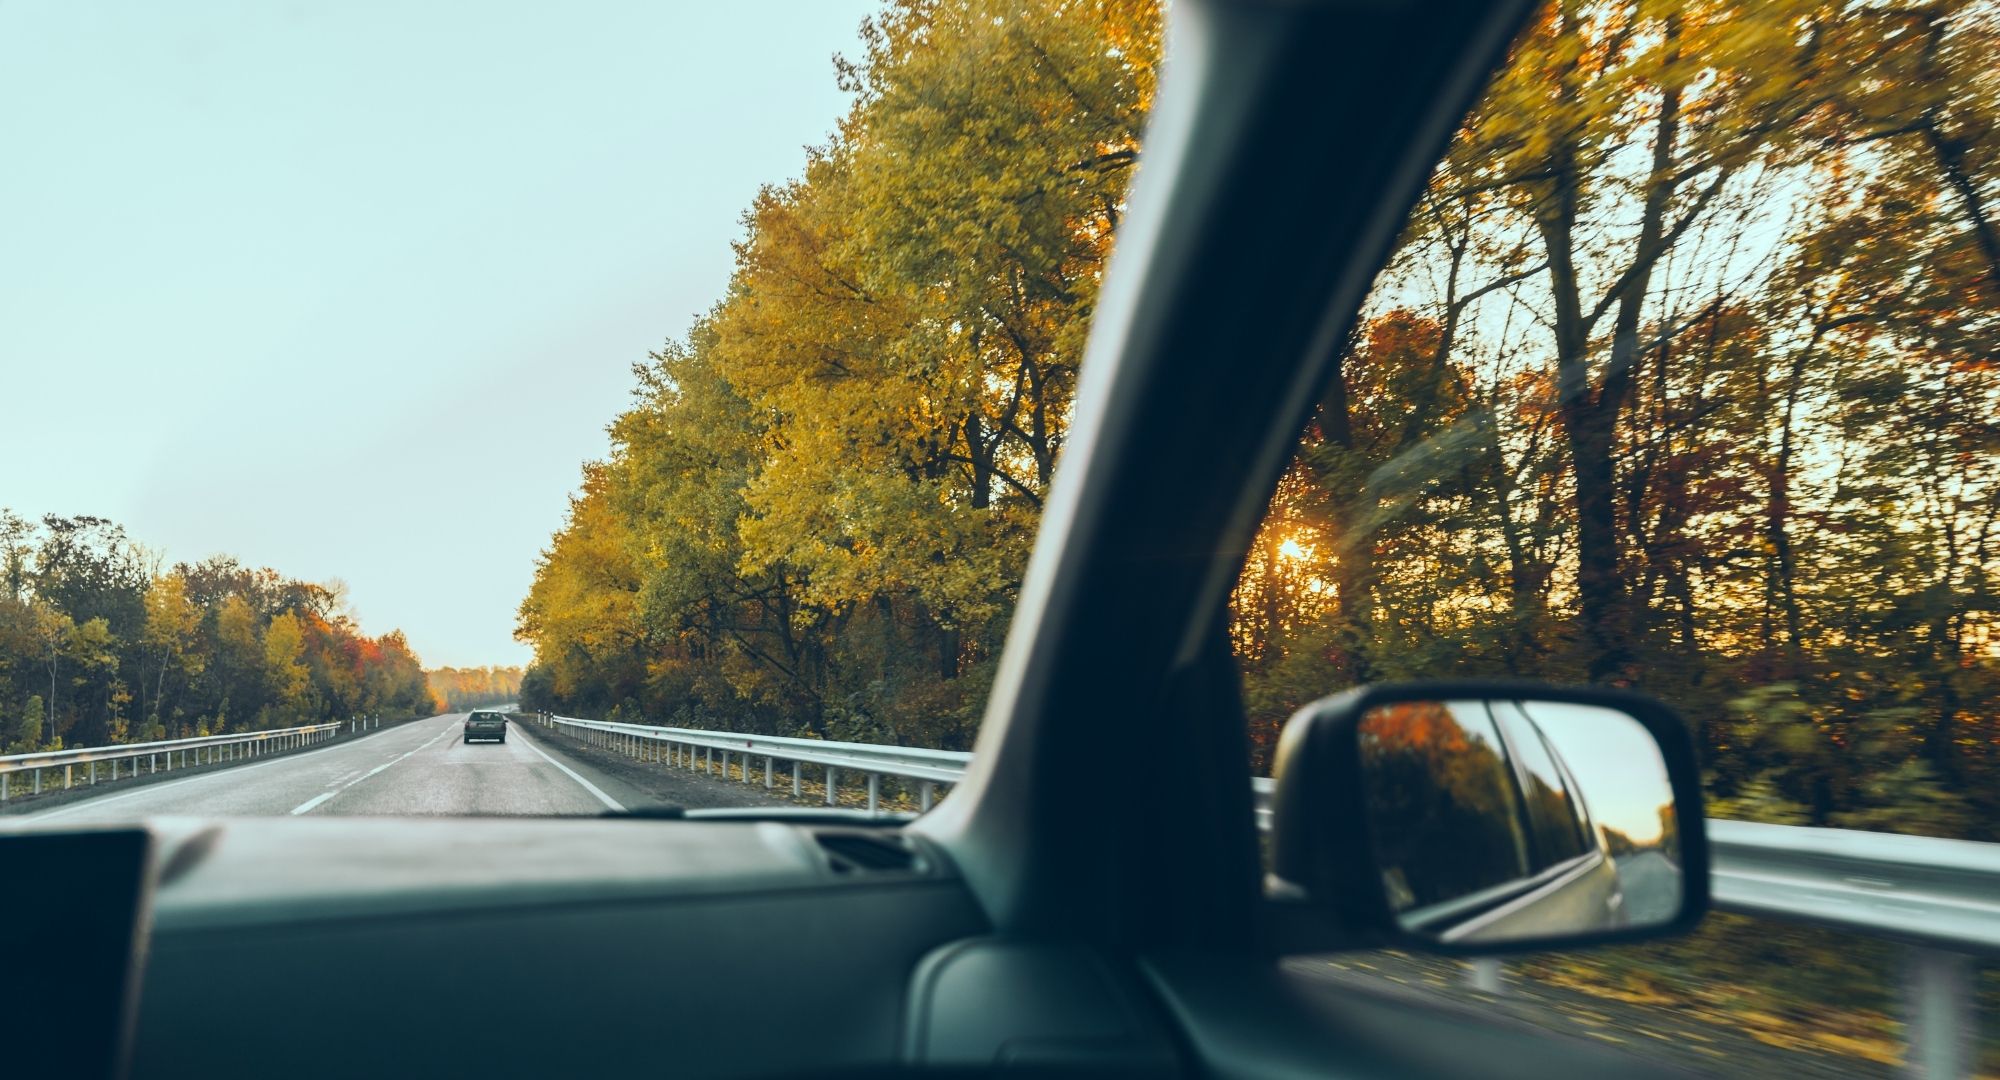 How to prepare your car for autumn?